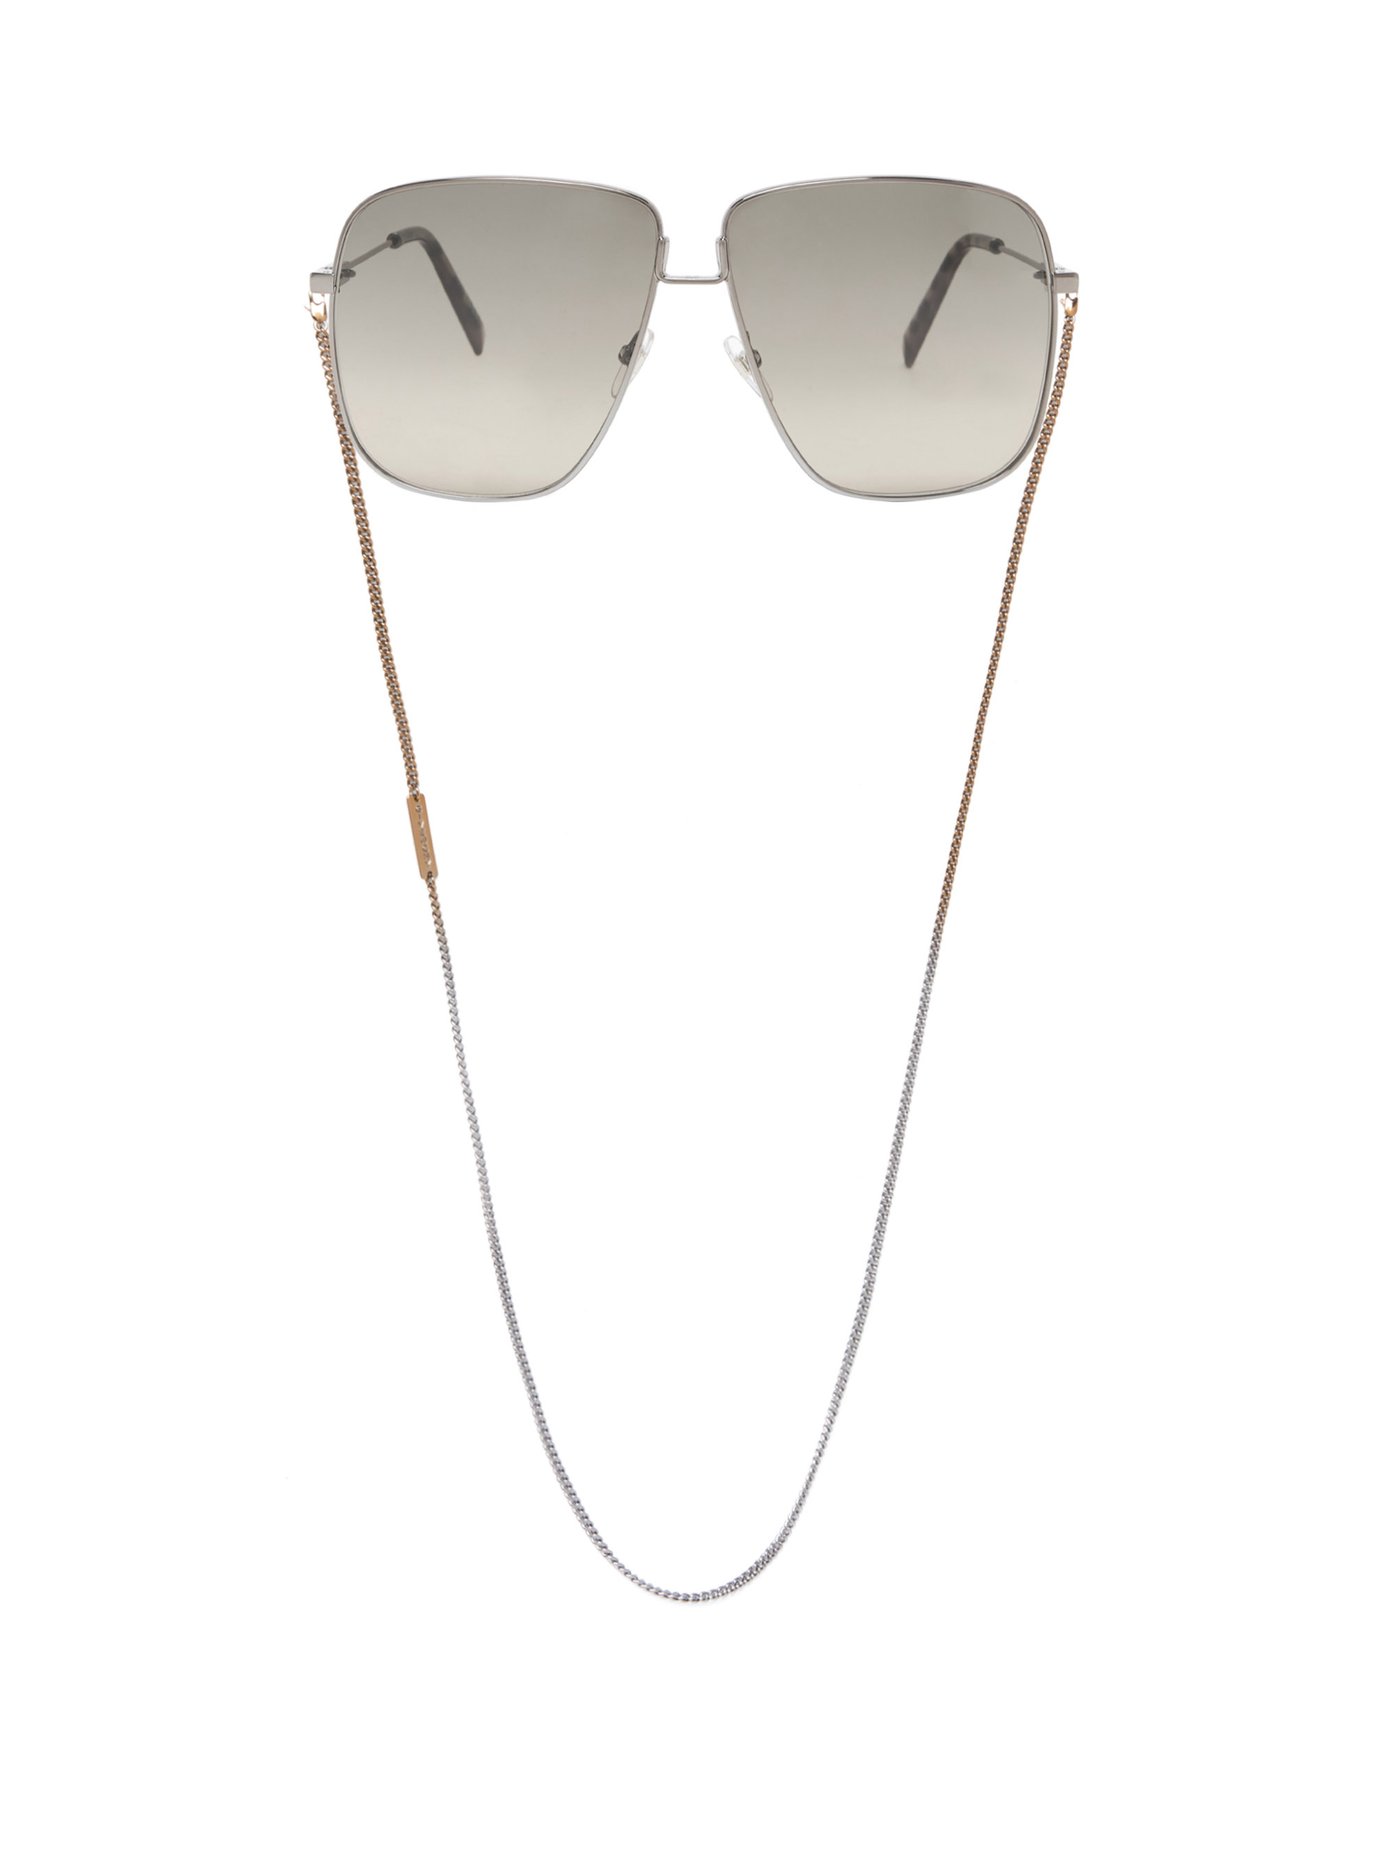 Oversized-square metal sunglasses and 